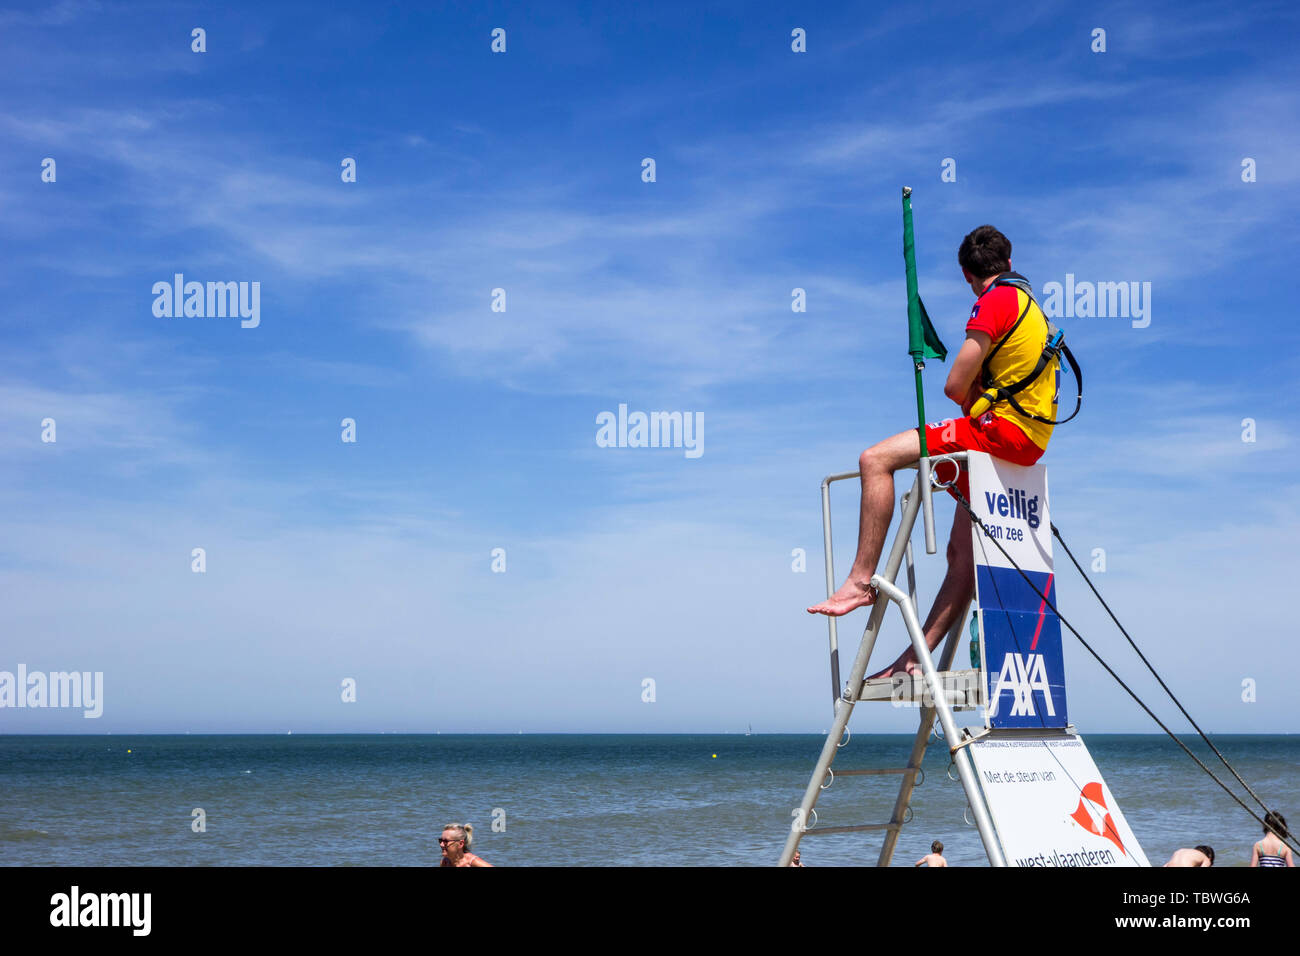 Beach lifeguard supervising bathers and swimmers along the Belgian North Sea coast from portable high chair / tower, Belgium Stock Photo